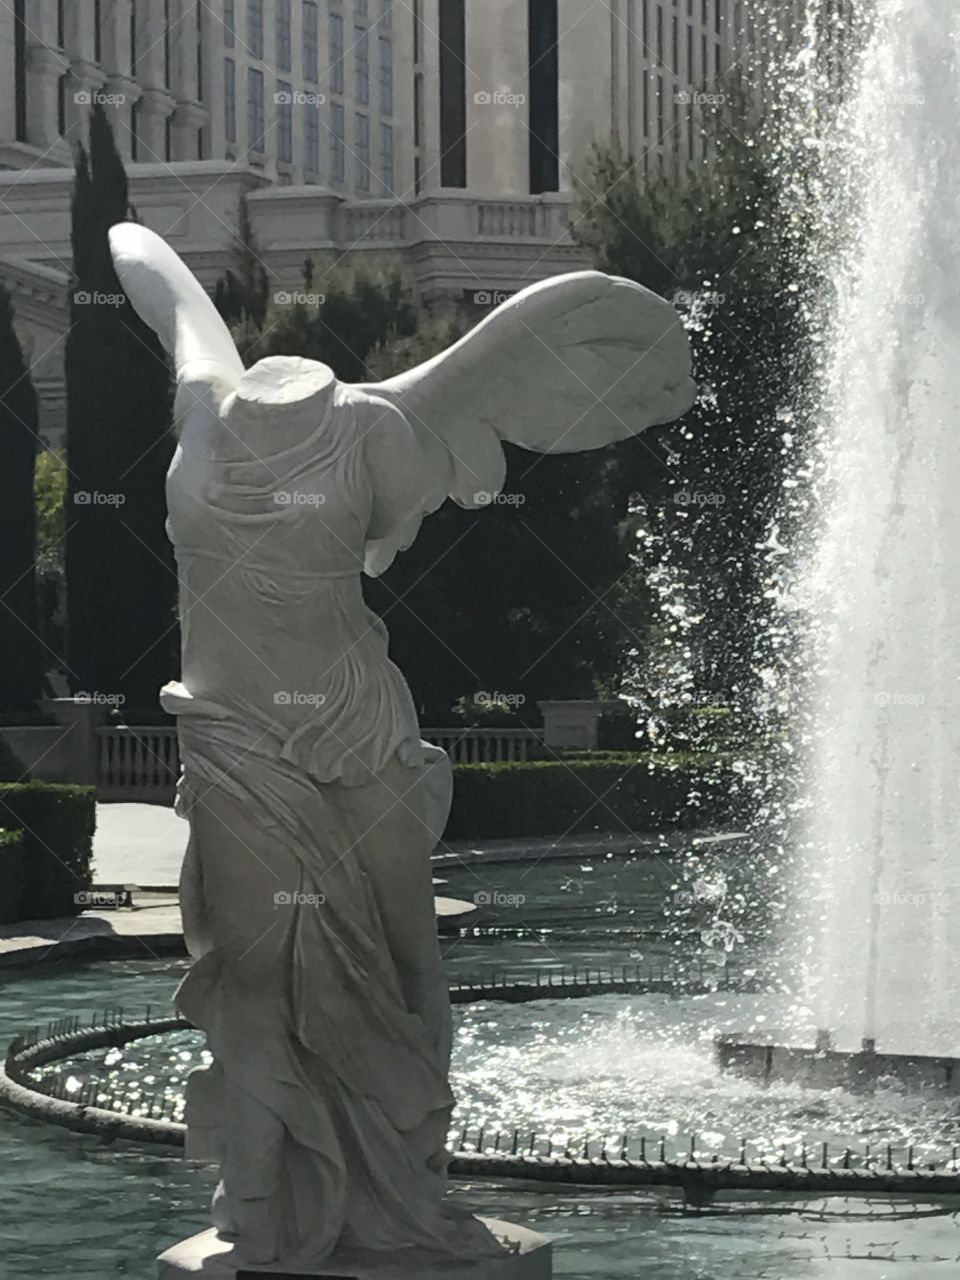 This is a statue standing in a water fountain in Las Vegas. I captured this photo while walking down the strip. 